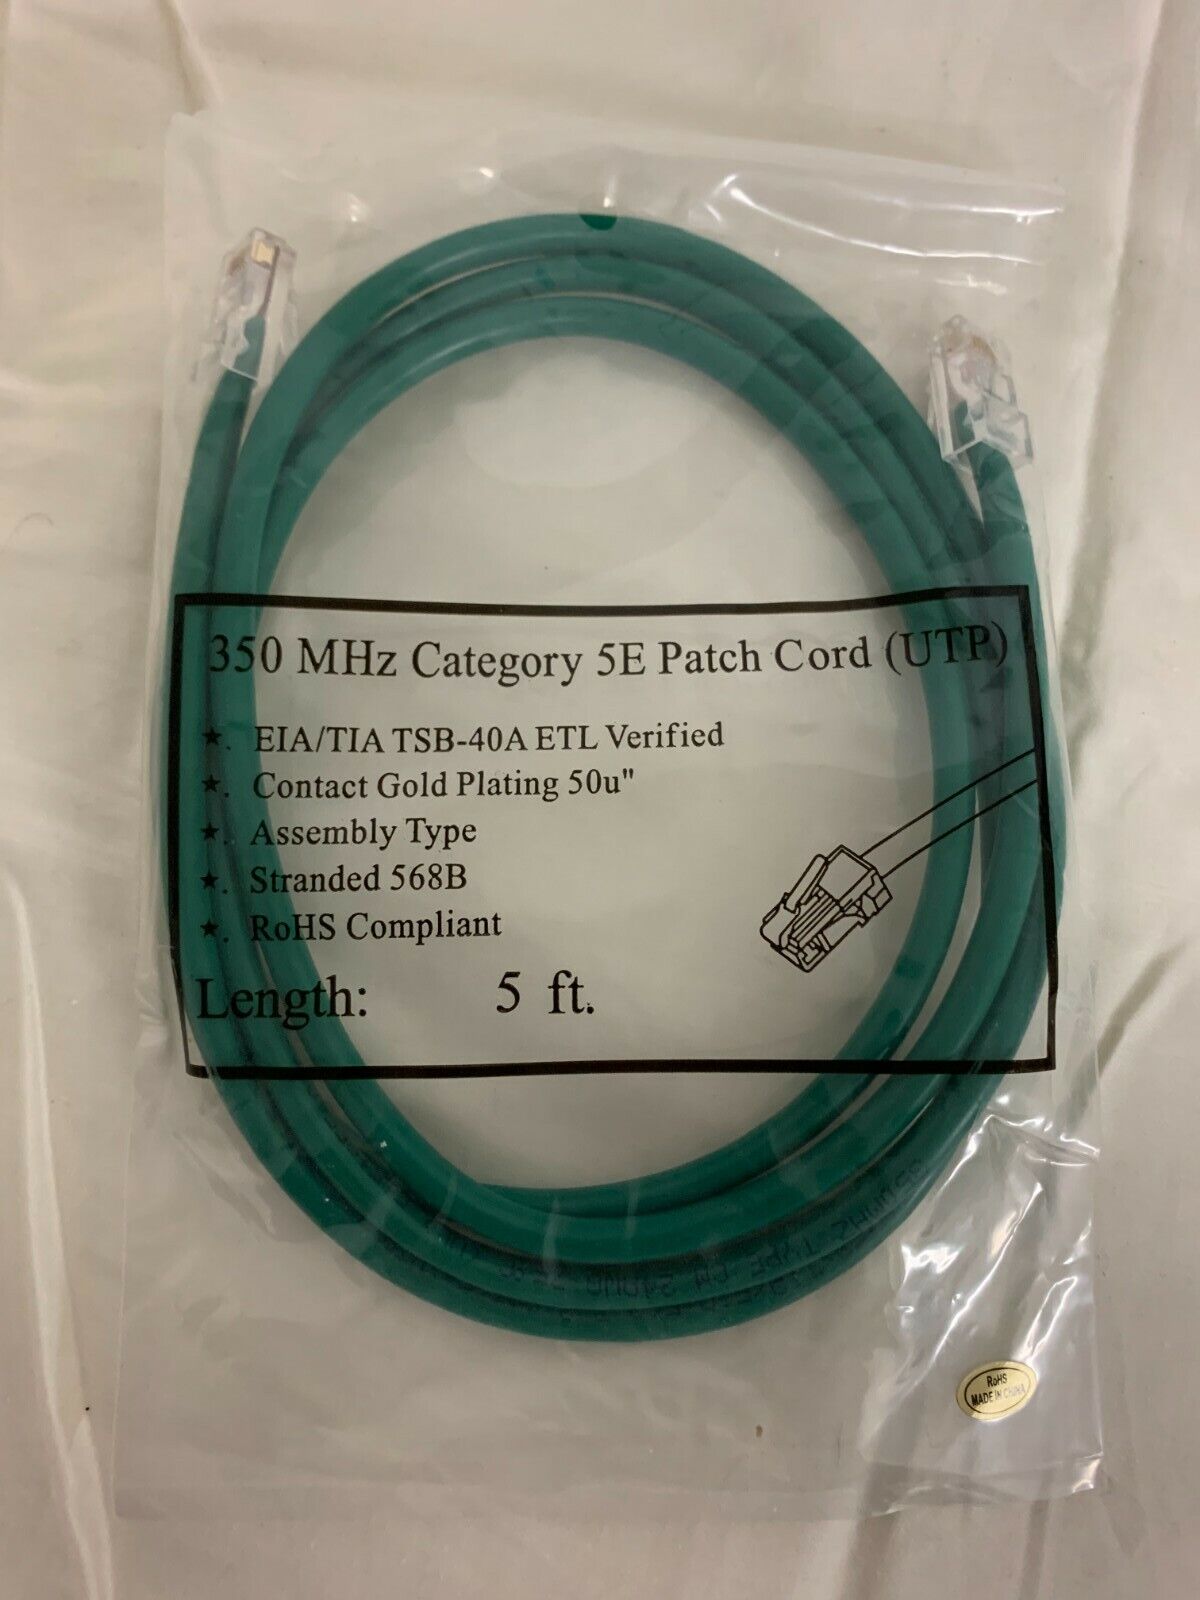 350 MHz Category 5E Patch Cord (UTP) 5 ft.